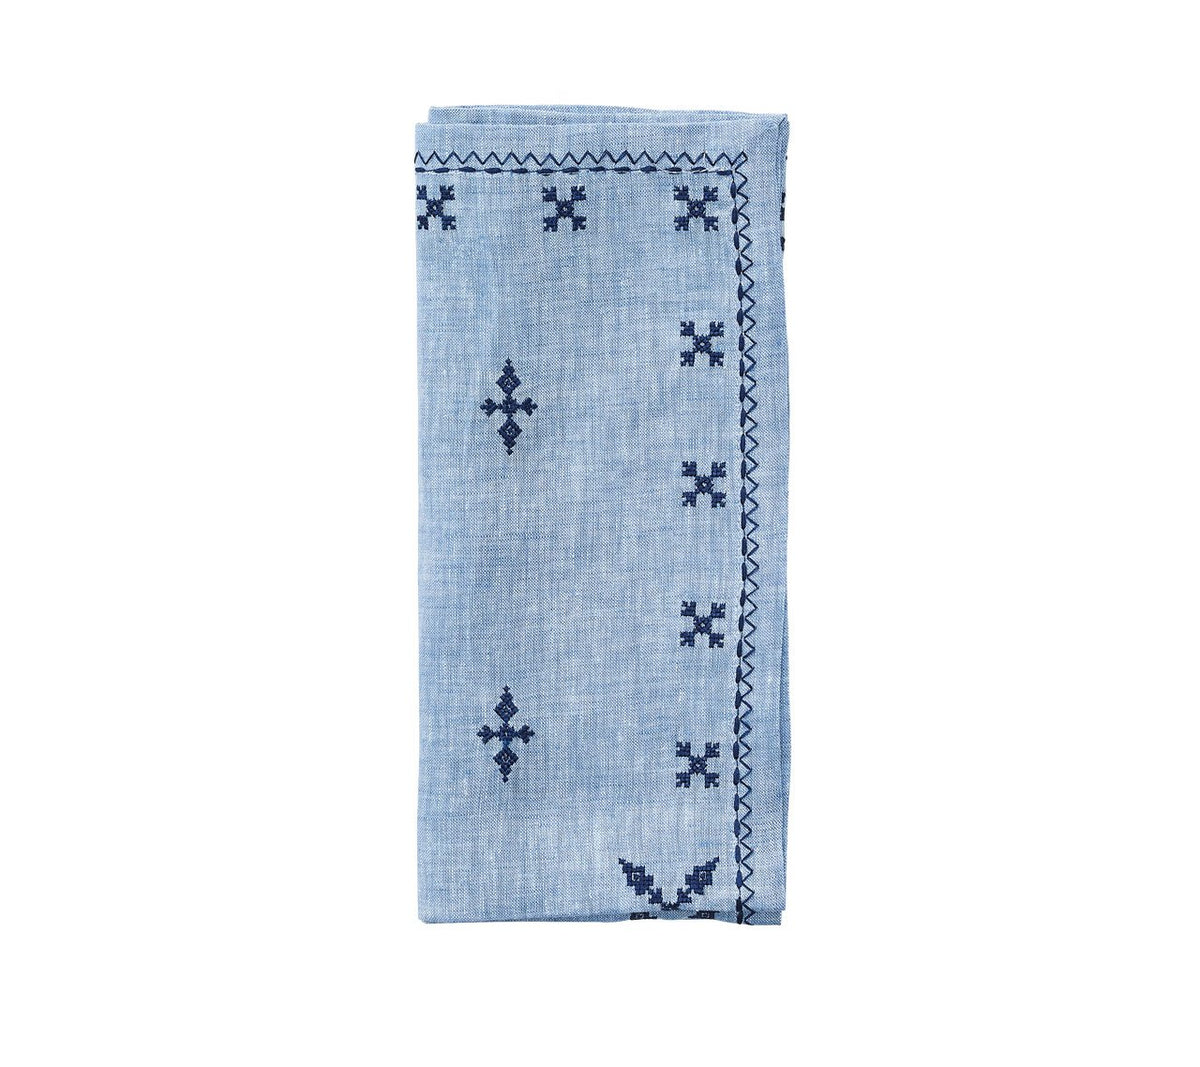 Periwinkle Fez Napkin with navy decals and border, folded